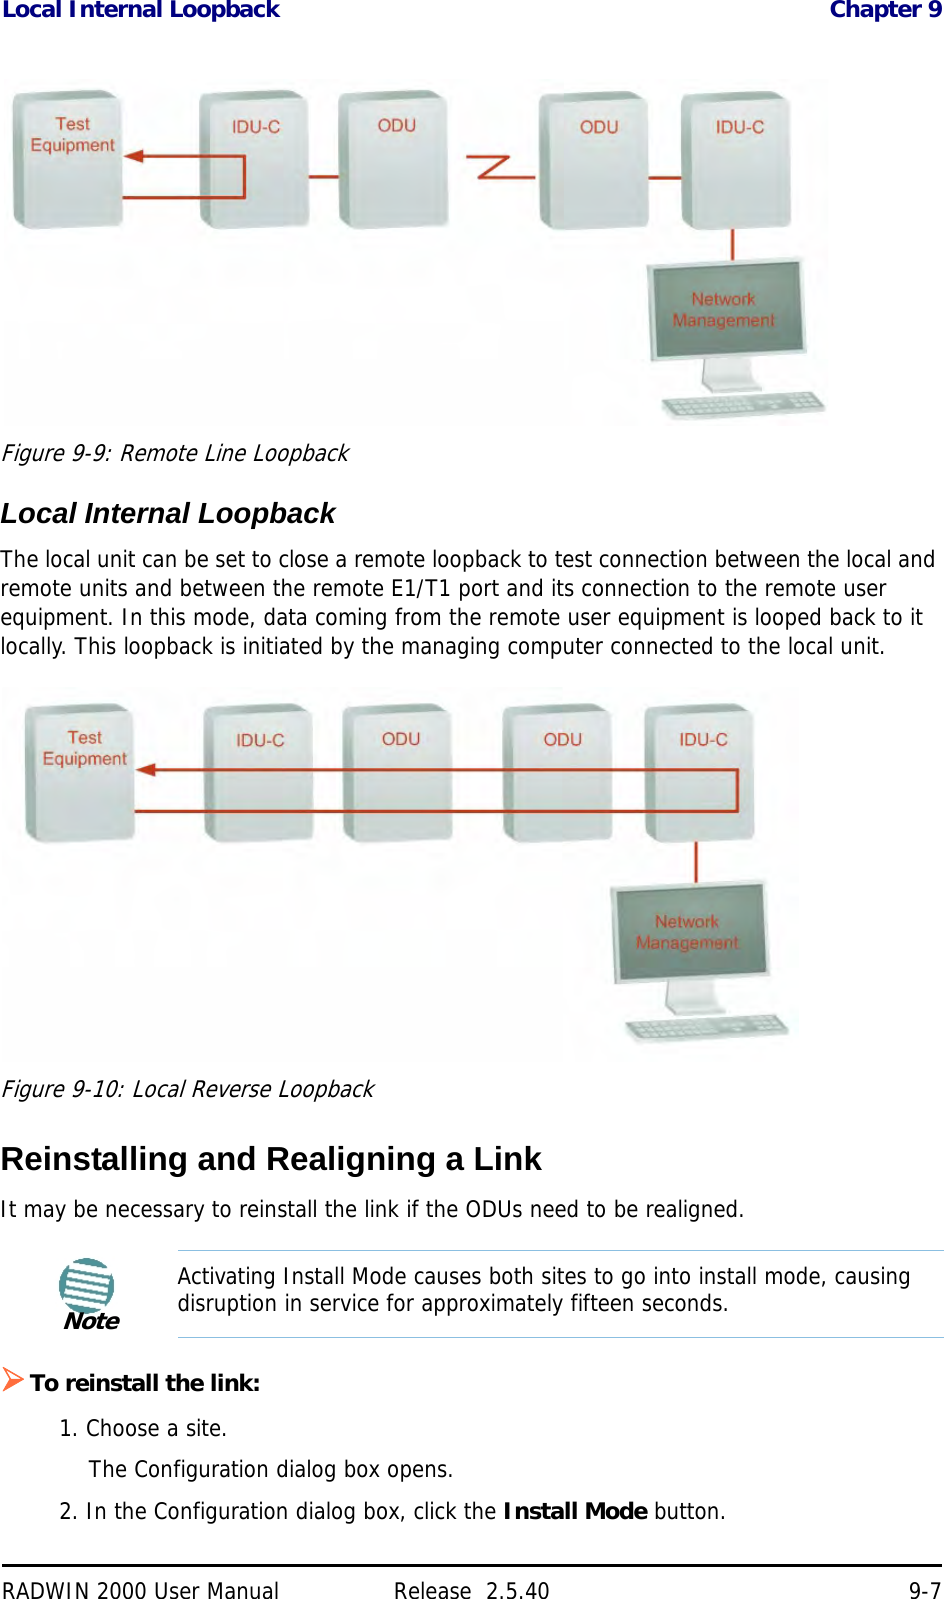 Local Internal Loopback Chapter 9RADWIN 2000 User Manual Release  2.5.40 9-7 Figure 9-9: Remote Line LoopbackLocal Internal LoopbackThe local unit can be set to close a remote loopback to test connection between the local and remote units and between the remote E1/T1 port and its connection to the remote user equipment. In this mode, data coming from the remote user equipment is looped back to it locally. This loopback is initiated by the managing computer connected to the local unit.Figure 9-10: Local Reverse LoopbackReinstalling and Realigning a LinkIt may be necessary to reinstall the link if the ODUs need to be realigned.To reinstall the link:1. Choose a site.The Configuration dialog box opens.2. In the Configuration dialog box, click the Install Mode button.NoteActivating Install Mode causes both sites to go into install mode, causing disruption in service for approximately fifteen seconds.